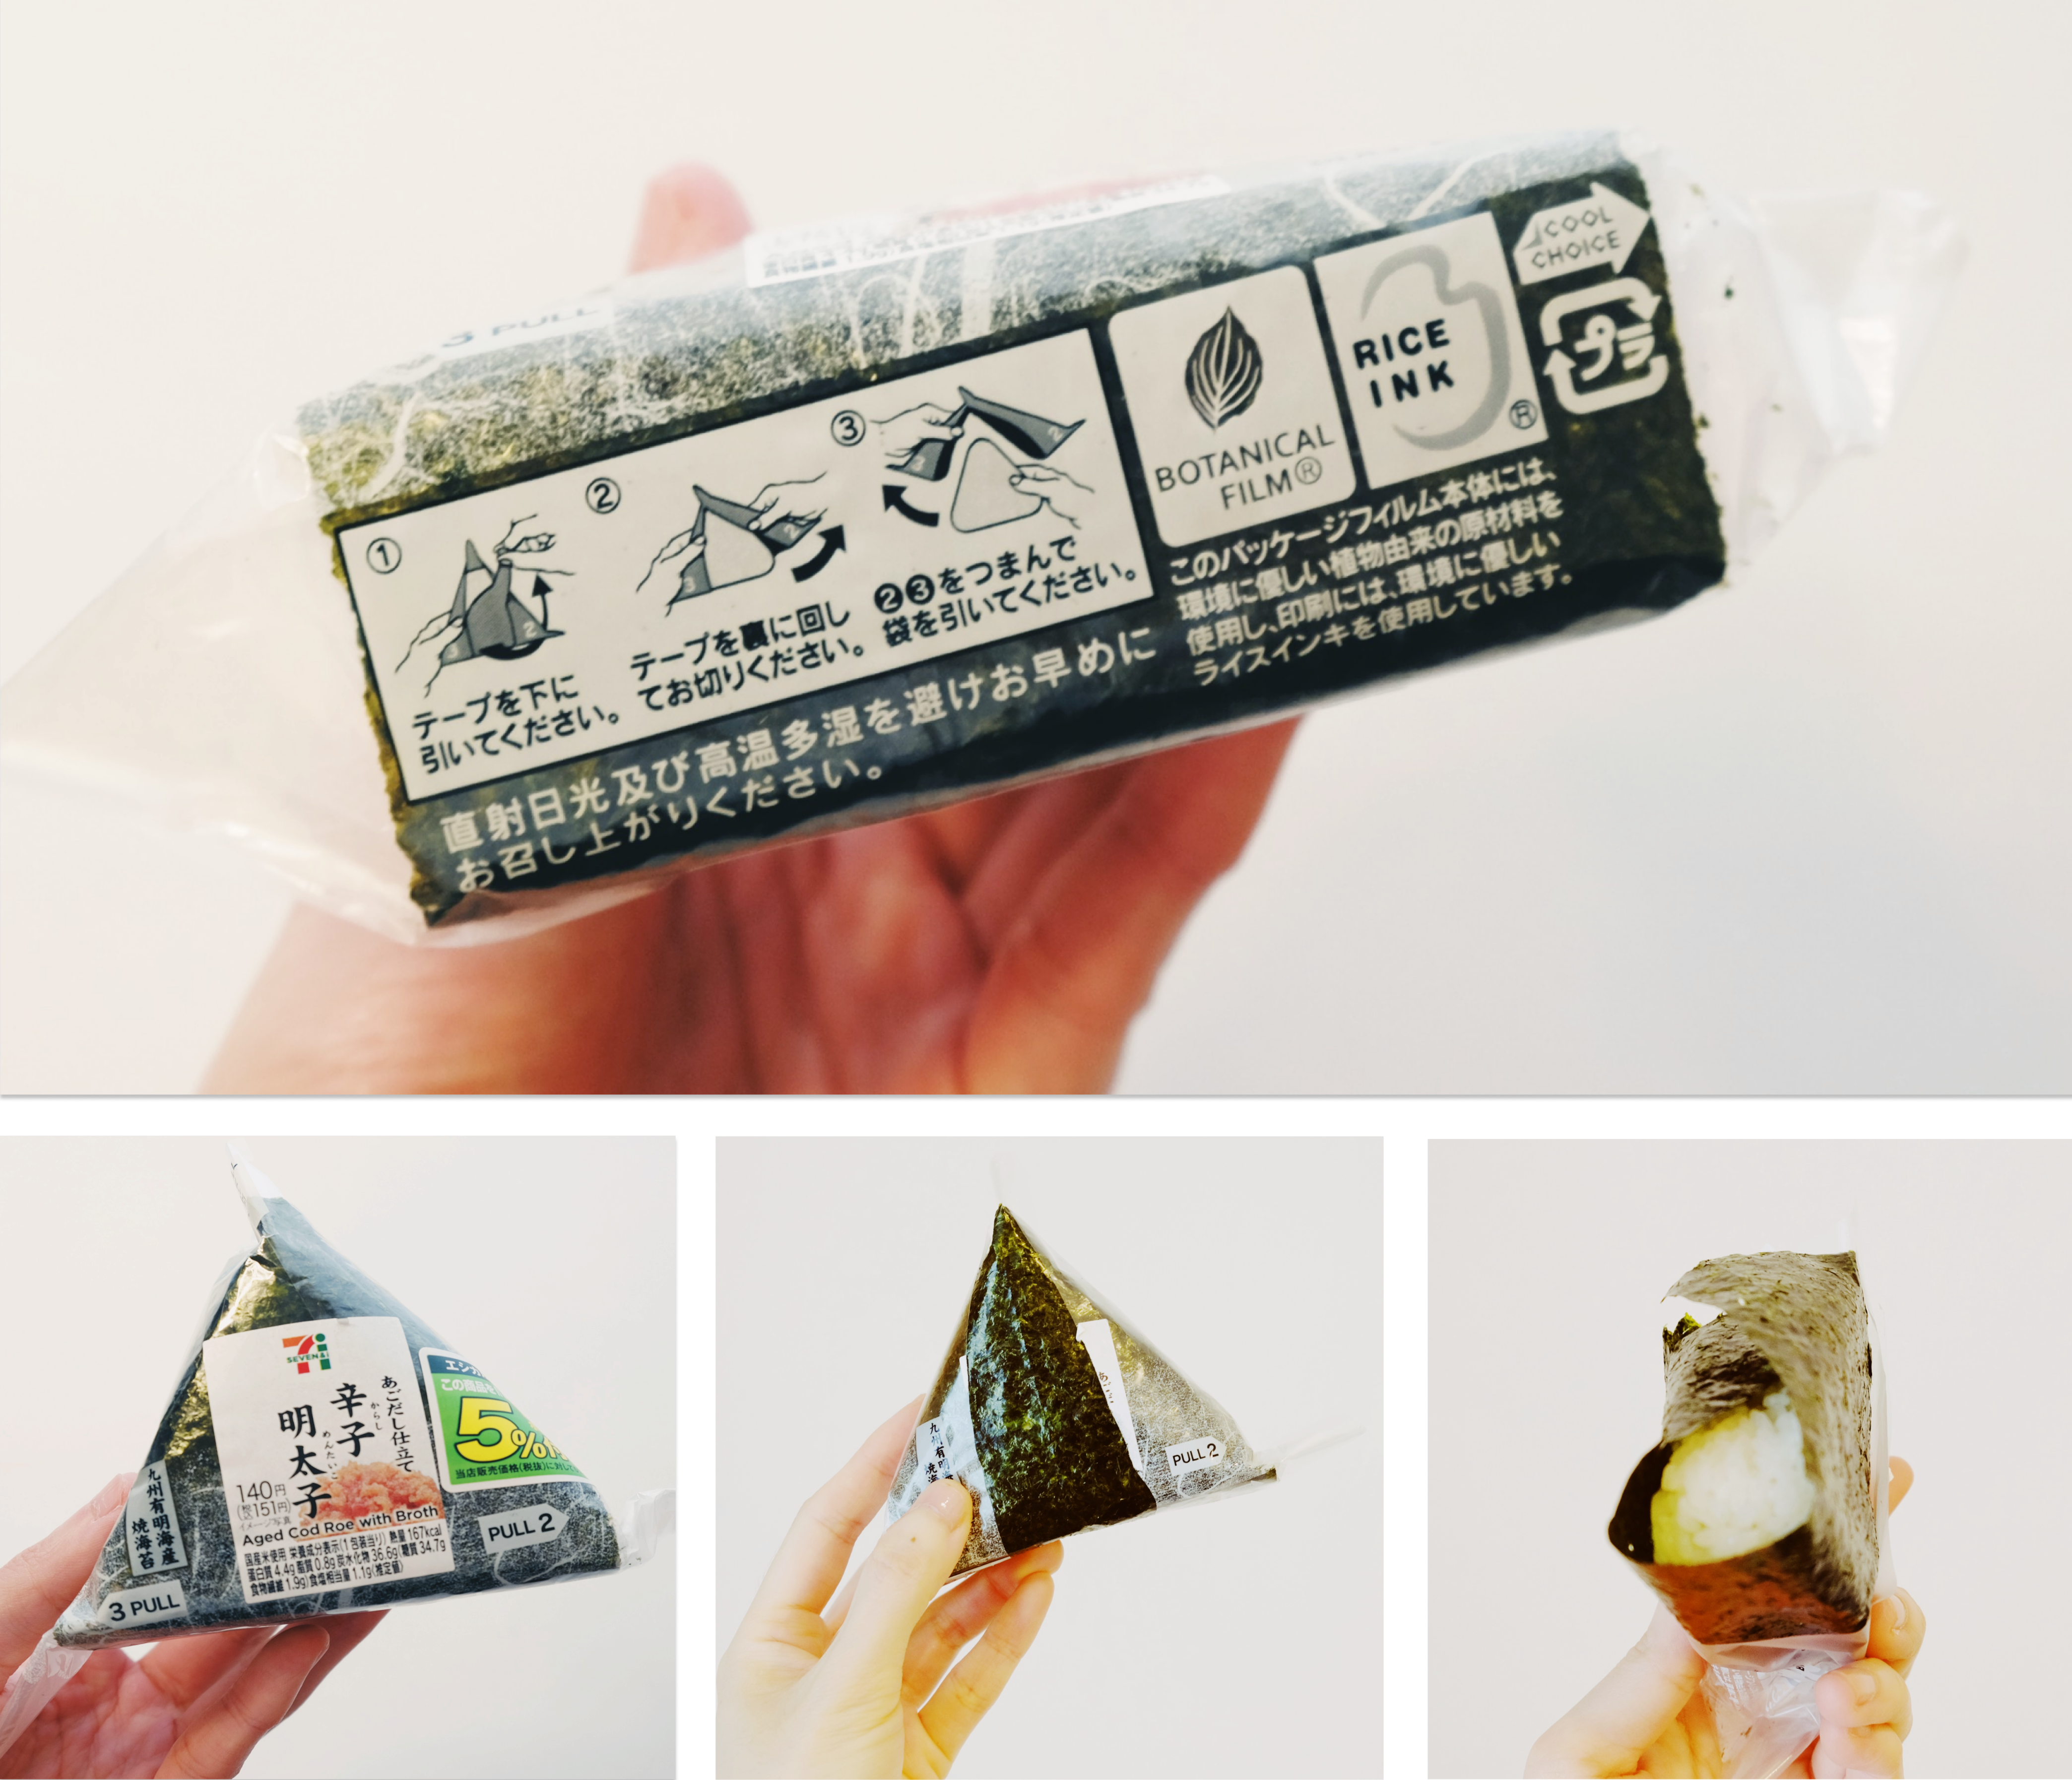 Main image: Photograph of hand holding a triangular packaged onigiri rice ball. The outer package illustrates how to open the onigiri by separating the nori seaweed from the rice underneath. L-R, One: Photograph of a hand holding an onigiri rice ball. Two: Photograph of a hand holding a partially opened onigiri rice ball, and the layer of nori seaweed is exposed. Three: Photograph of a hand holding an opened onigiri rice ball, and the triangle-shaped rice is wrapped in a layer of nori seaweed.Main image: Photograph of hand holding a triangular packaged onigiri rice ball. The outer package illustrates how to open the onigiri by separating the nori seaweed from the rice underneath. L-R, One: Photograph of a hand holding an onigiri rice ball. Two: Photograph of a hand holding a partially opened onigiri rice ball, and the layer of nori seaweed is exposed. Three: Photograph of a hand holding an opened onigiri rice ball, and the triangle-shaped rice is wrapped in a layer of nori seaweed.